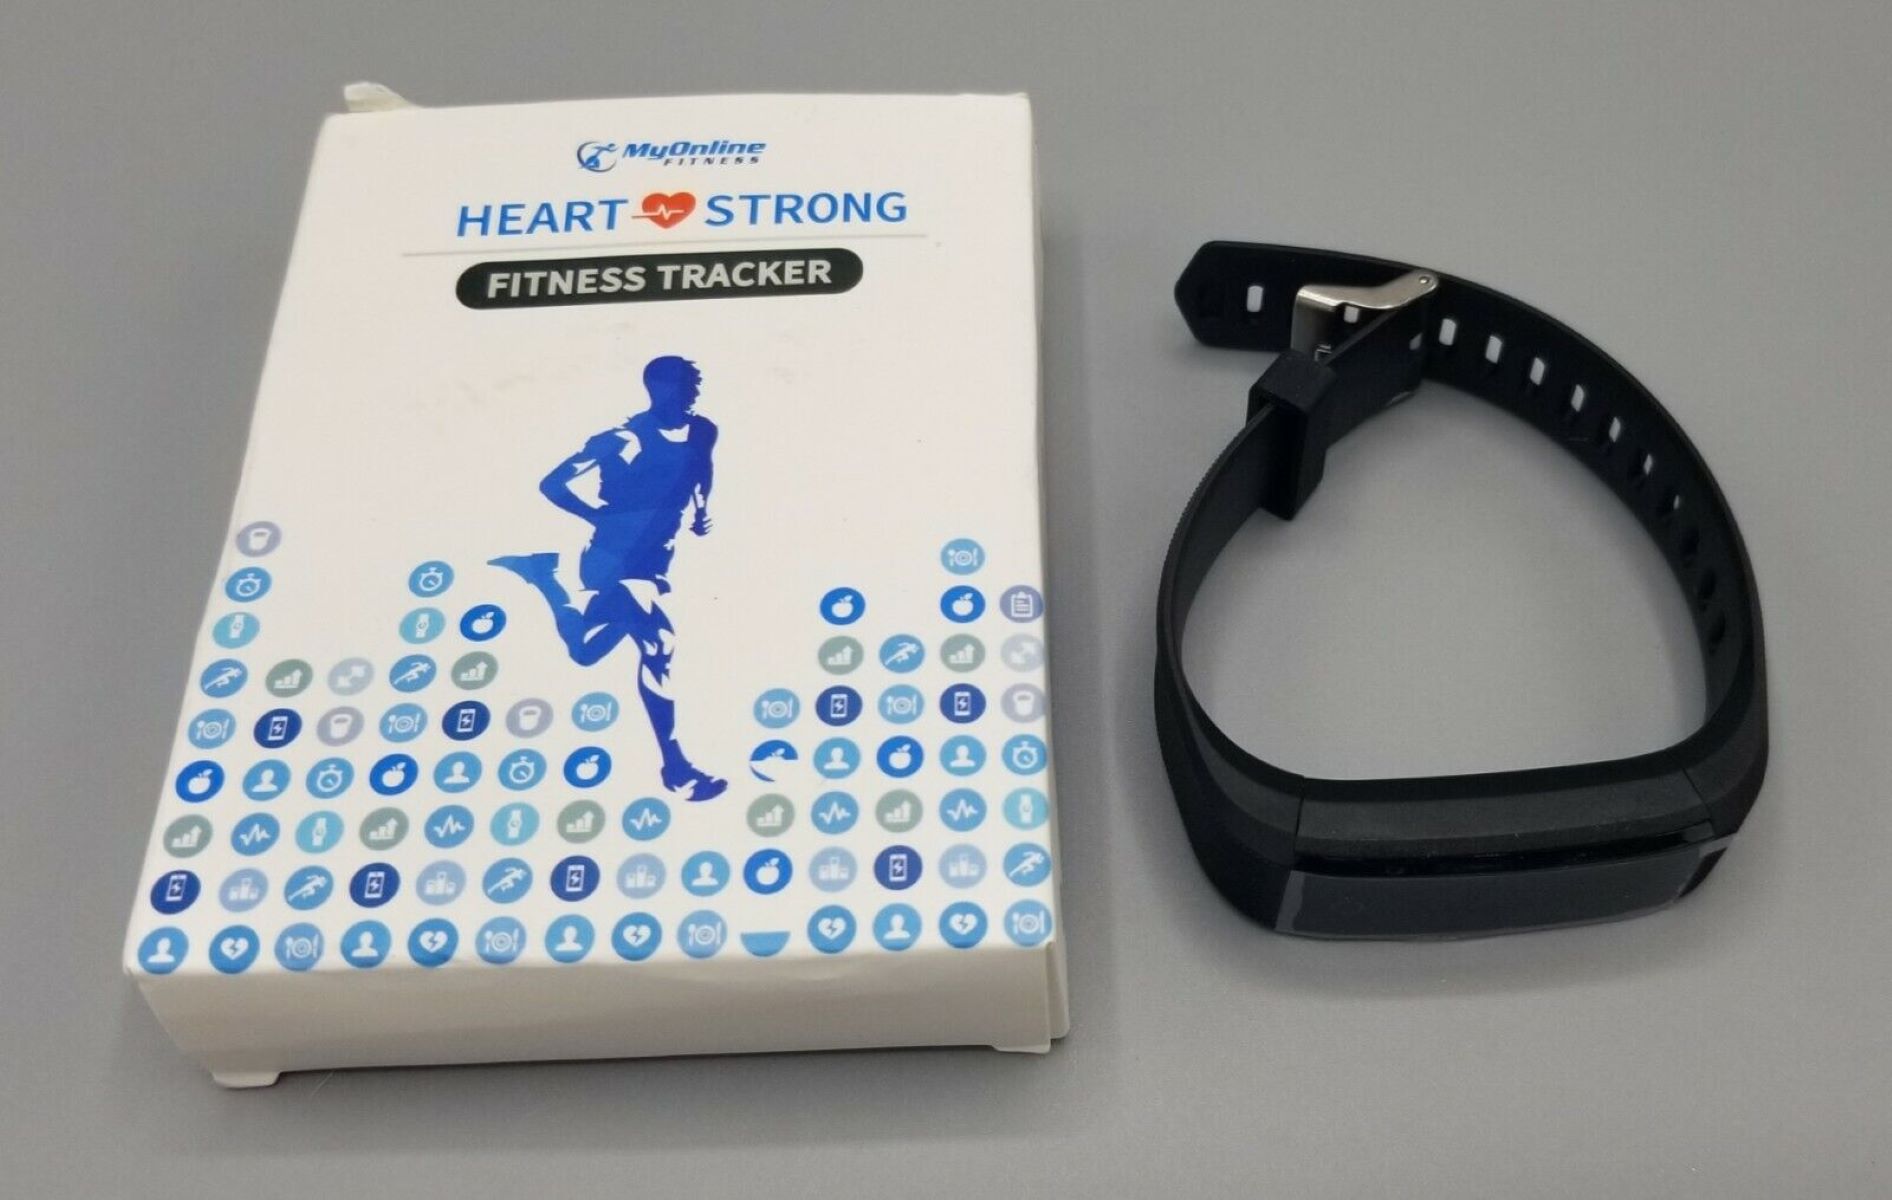 How To Pair Heart-Strong Fitness Tracker With Computer